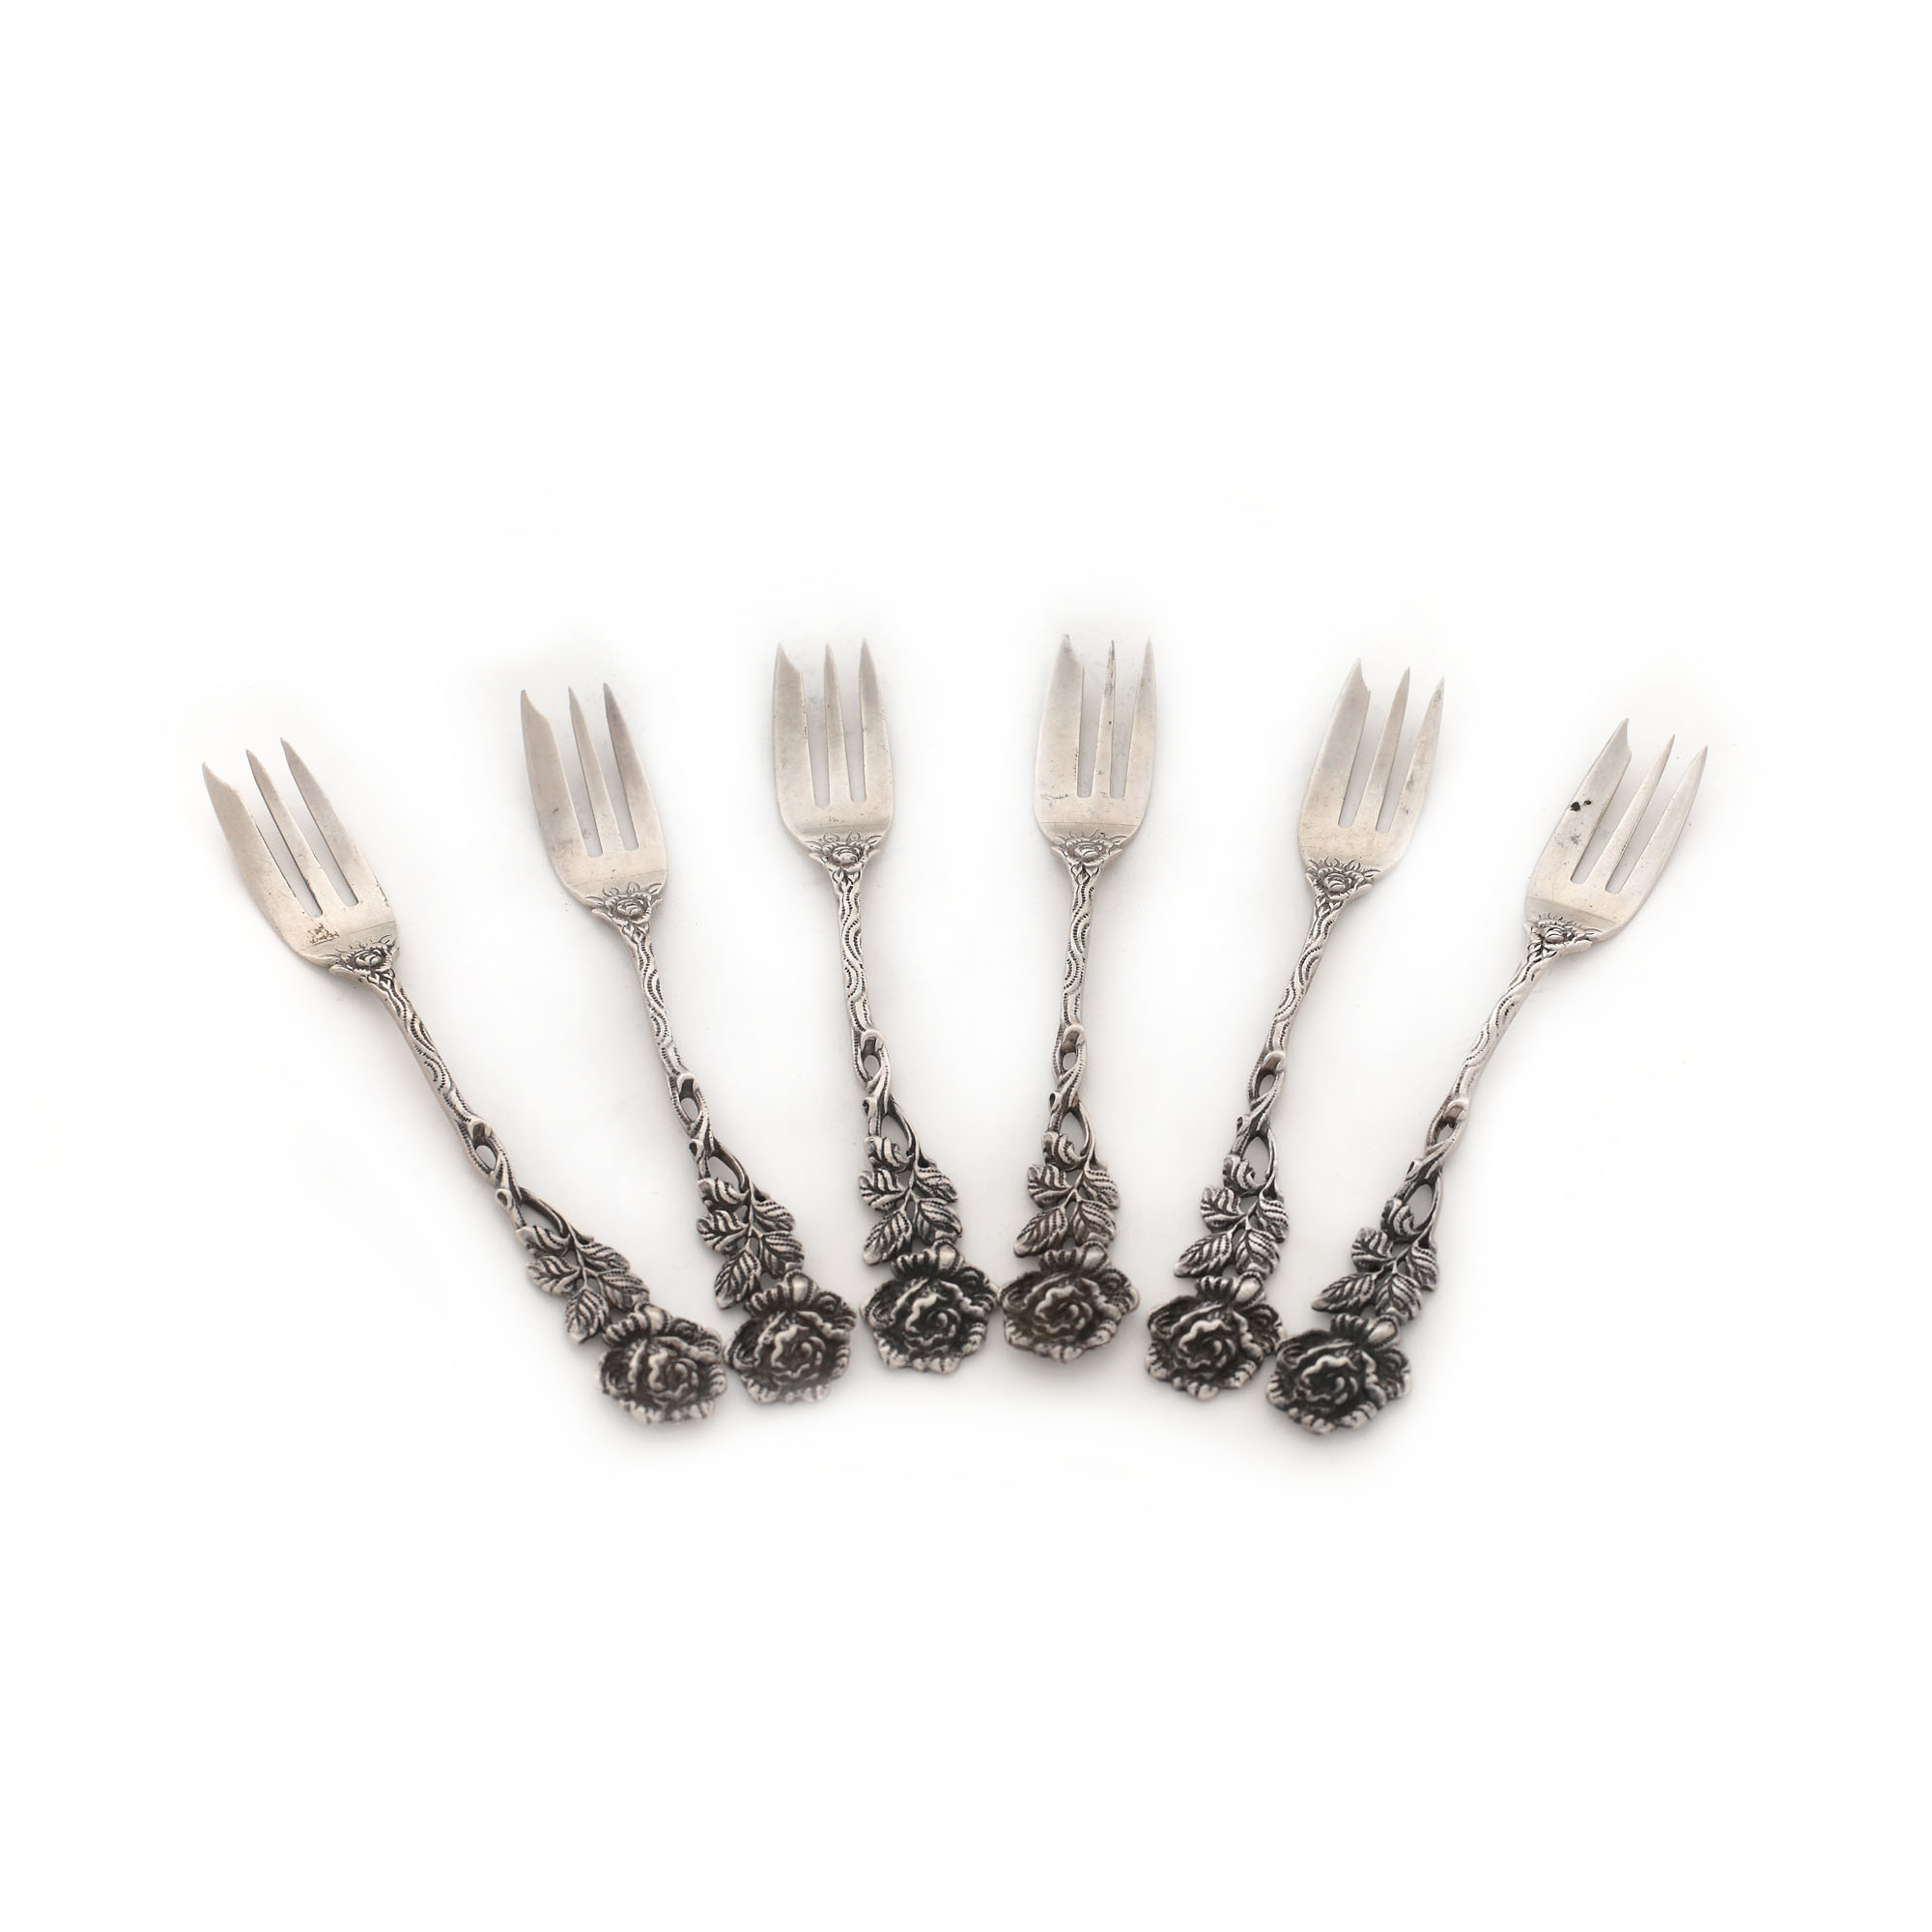 German workshop, Albert Bodemer silver set, consisting of six teaspoons and six forks, with rose-sha - Image 5 of 9